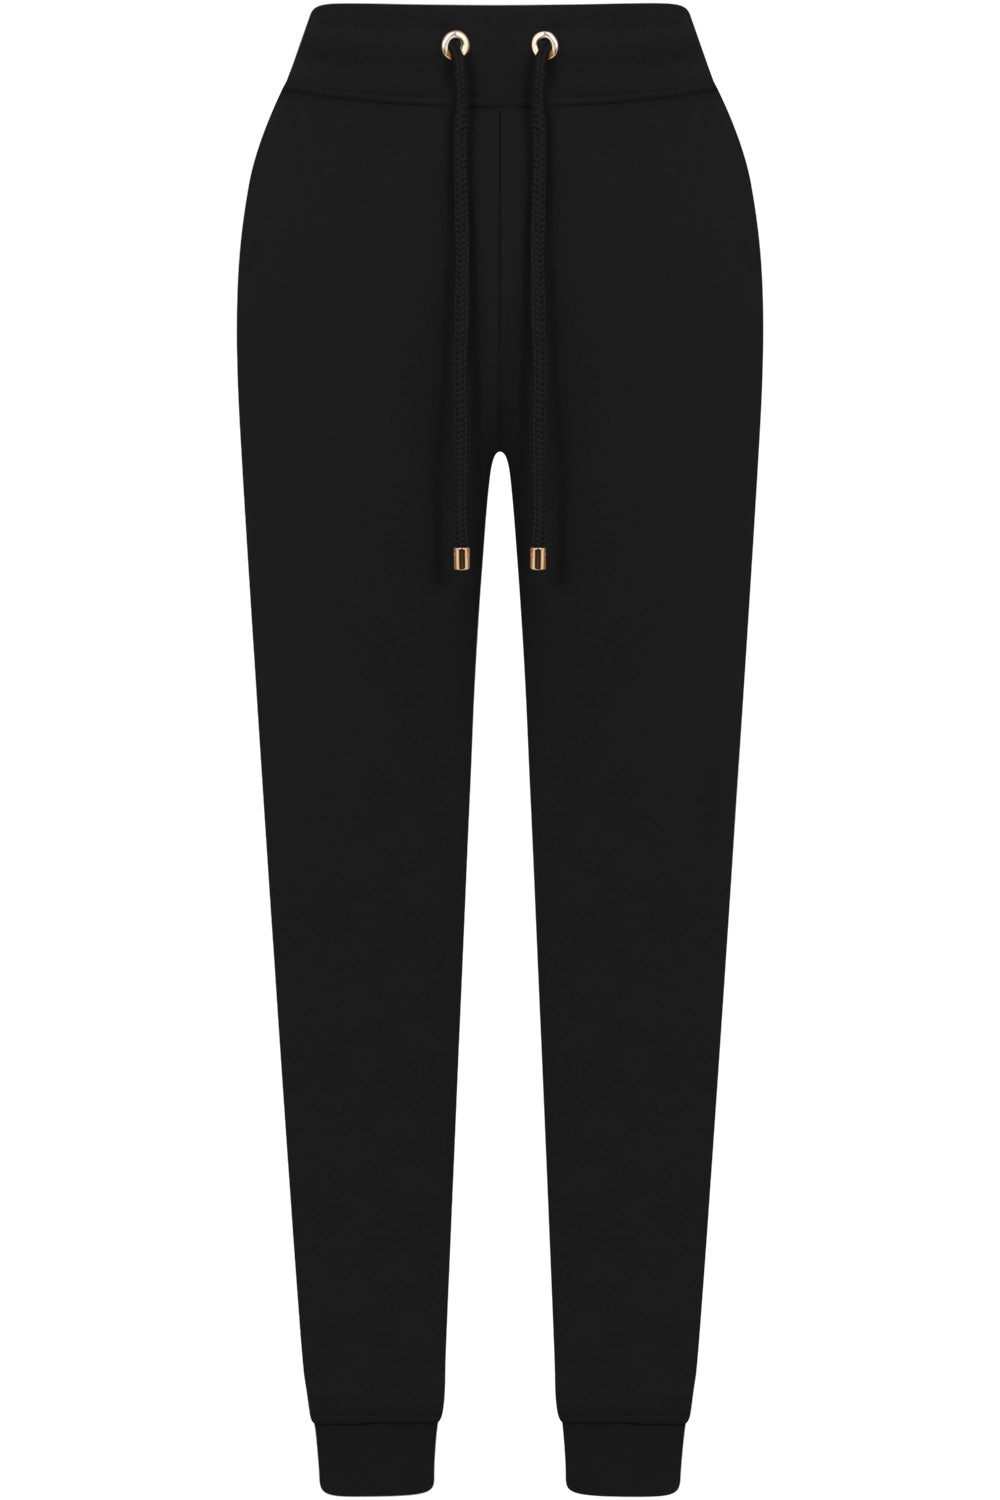 MOTHER OF PEARL RTW JOGGER BLACK